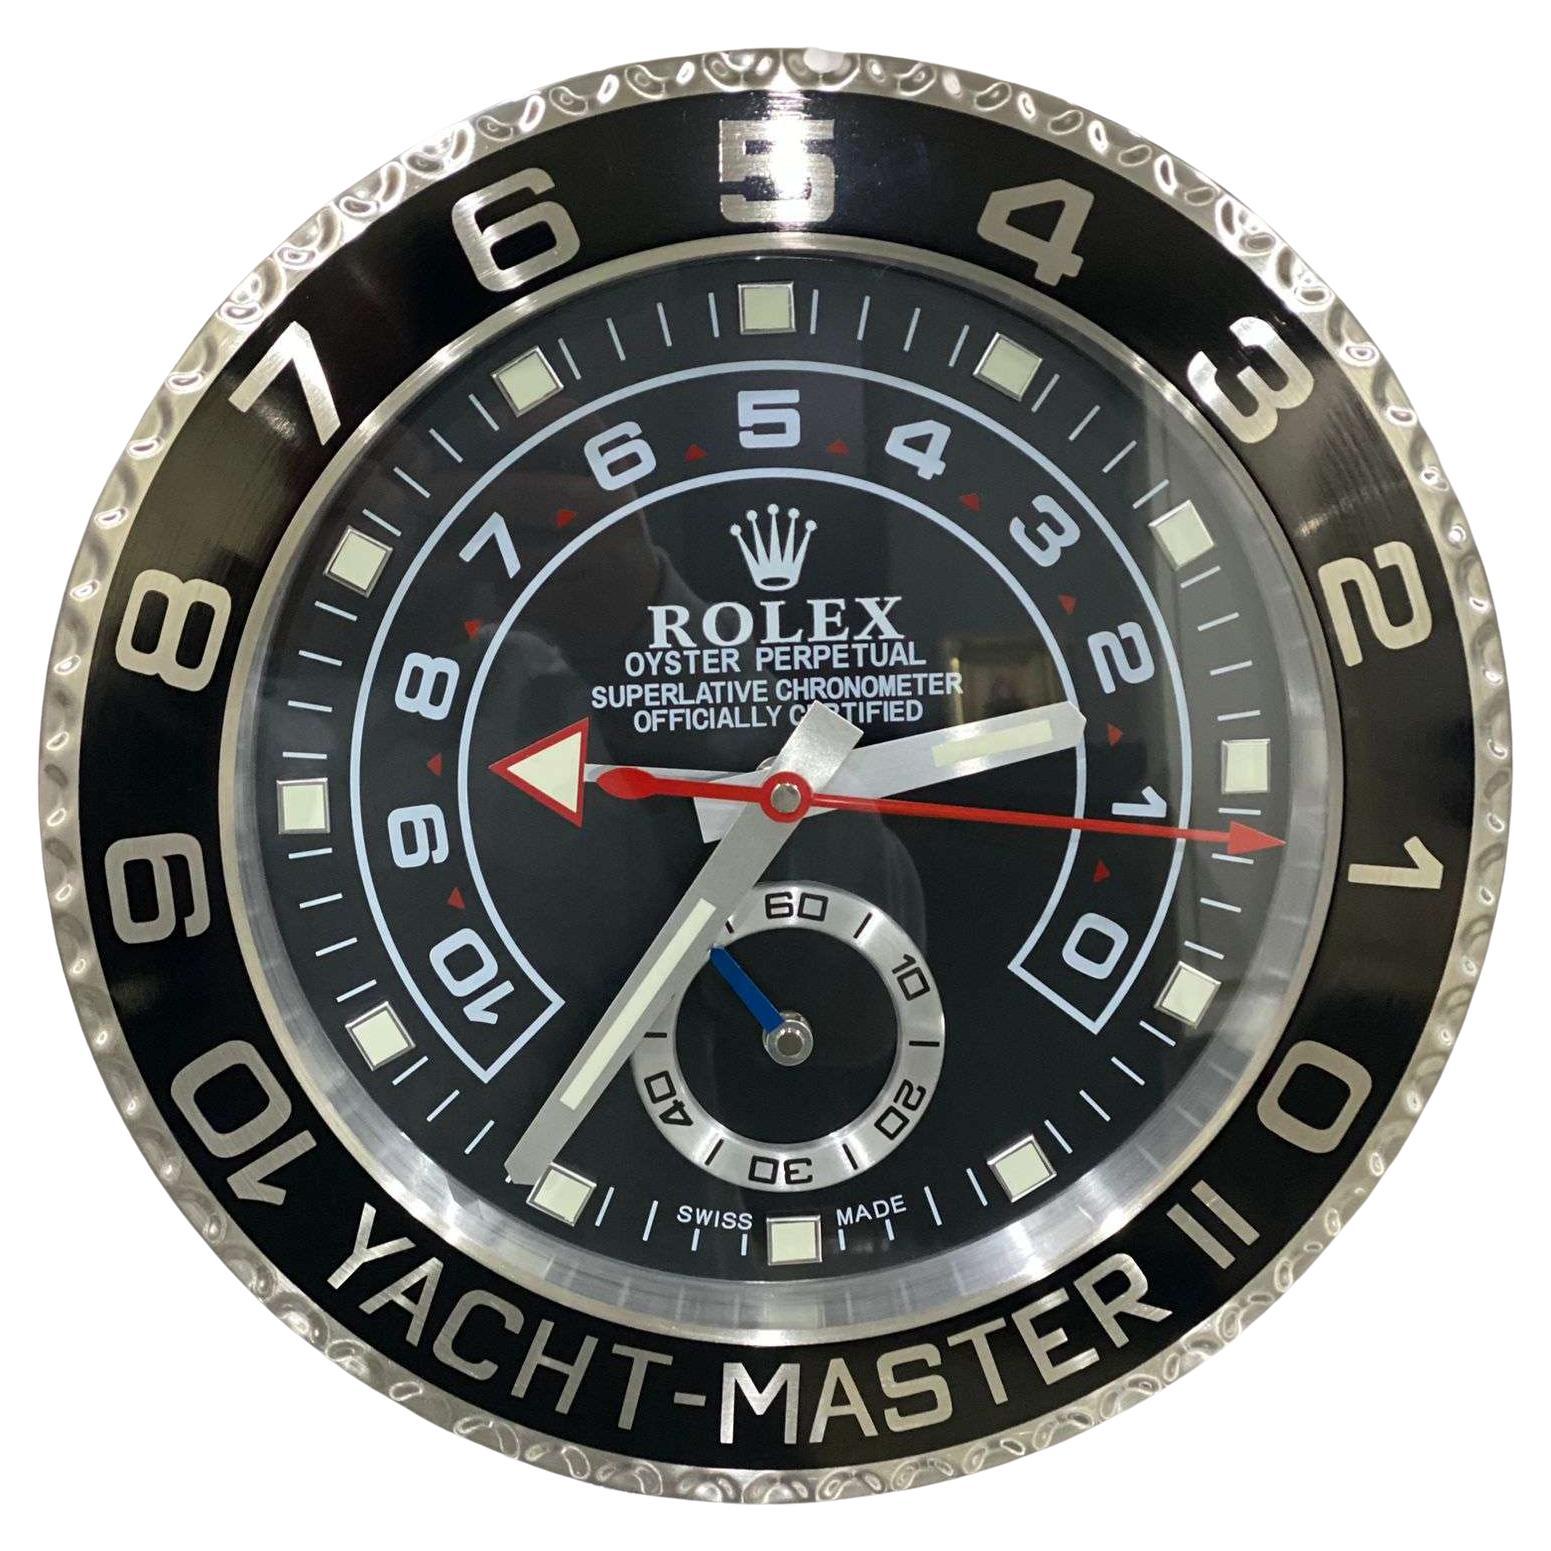 ROLEX Officially Certified Oyster Perpetual Black Yacht Master II Wall Clock  For Sale